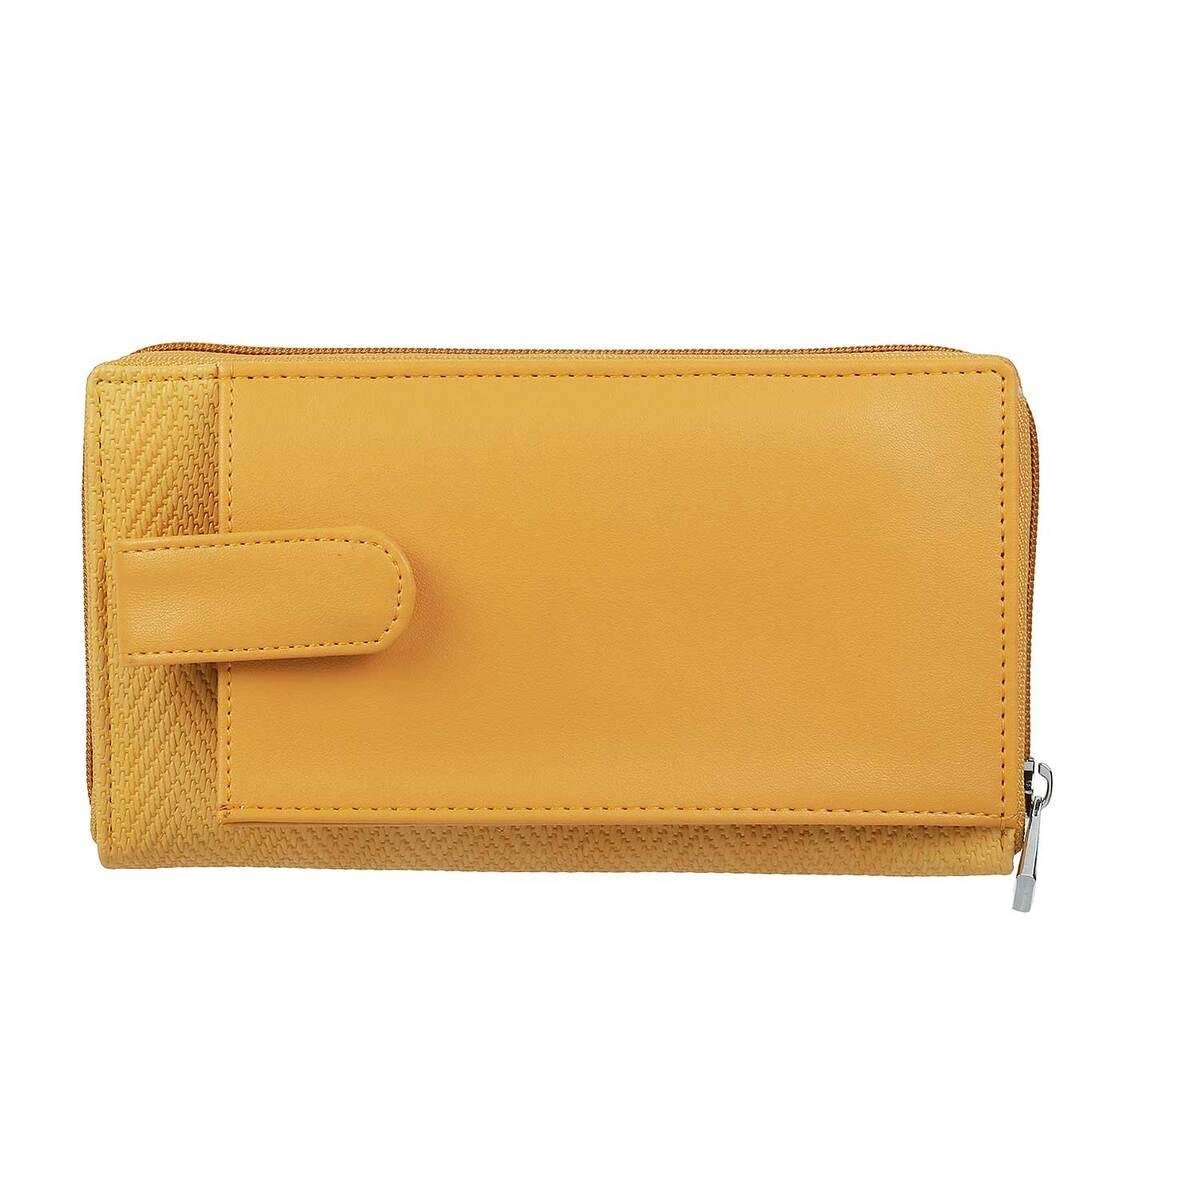 Stylish Mulberry Zip Coin Pouch